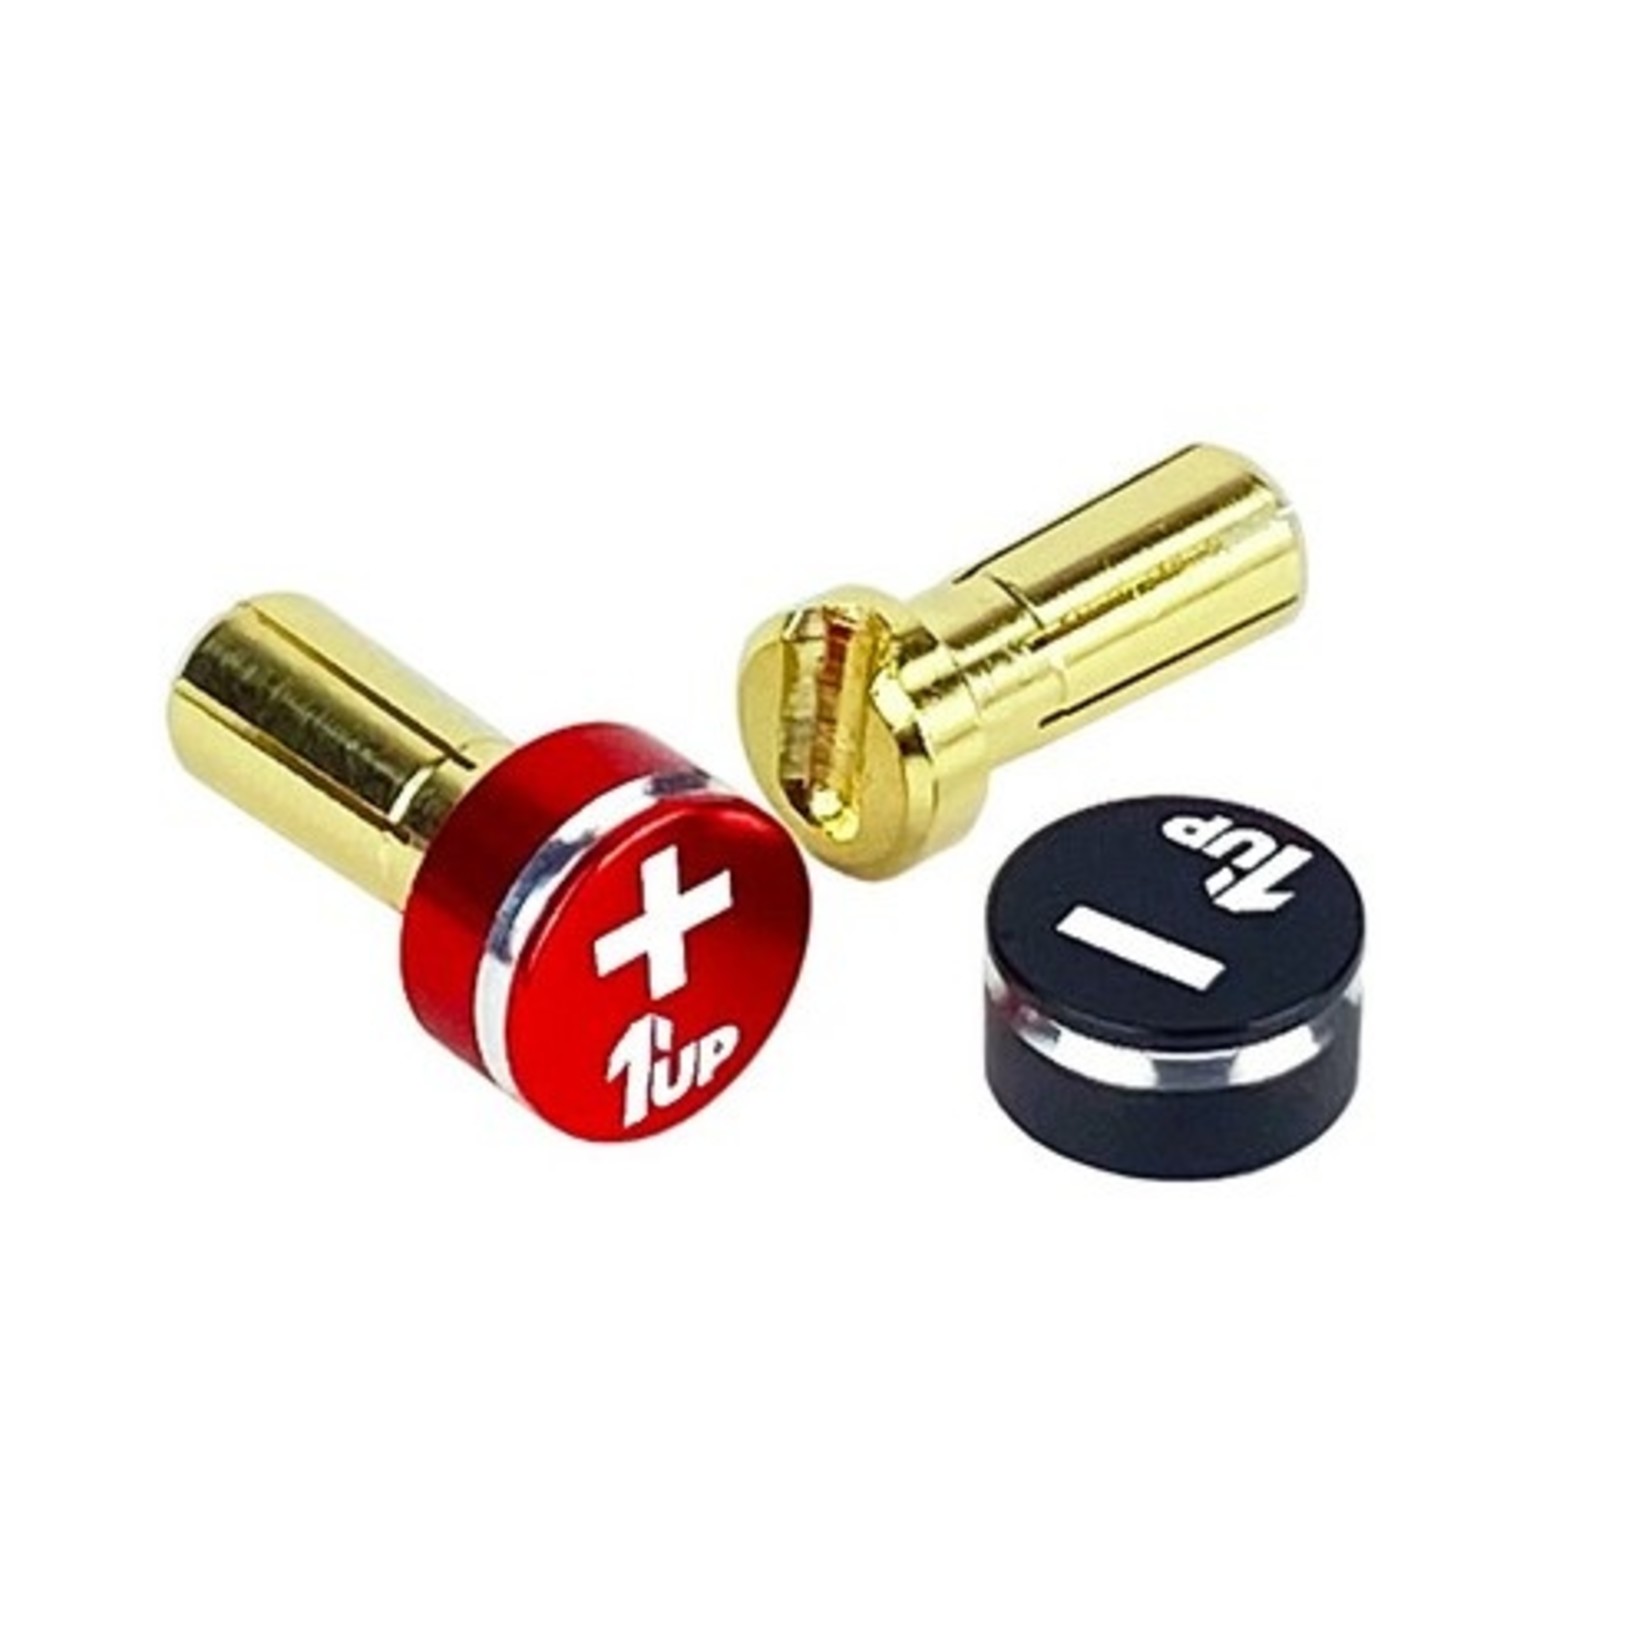 1UP Racing 1UP190432  LowPro Bullet Plugs & Grips, 5mm, Red/Black